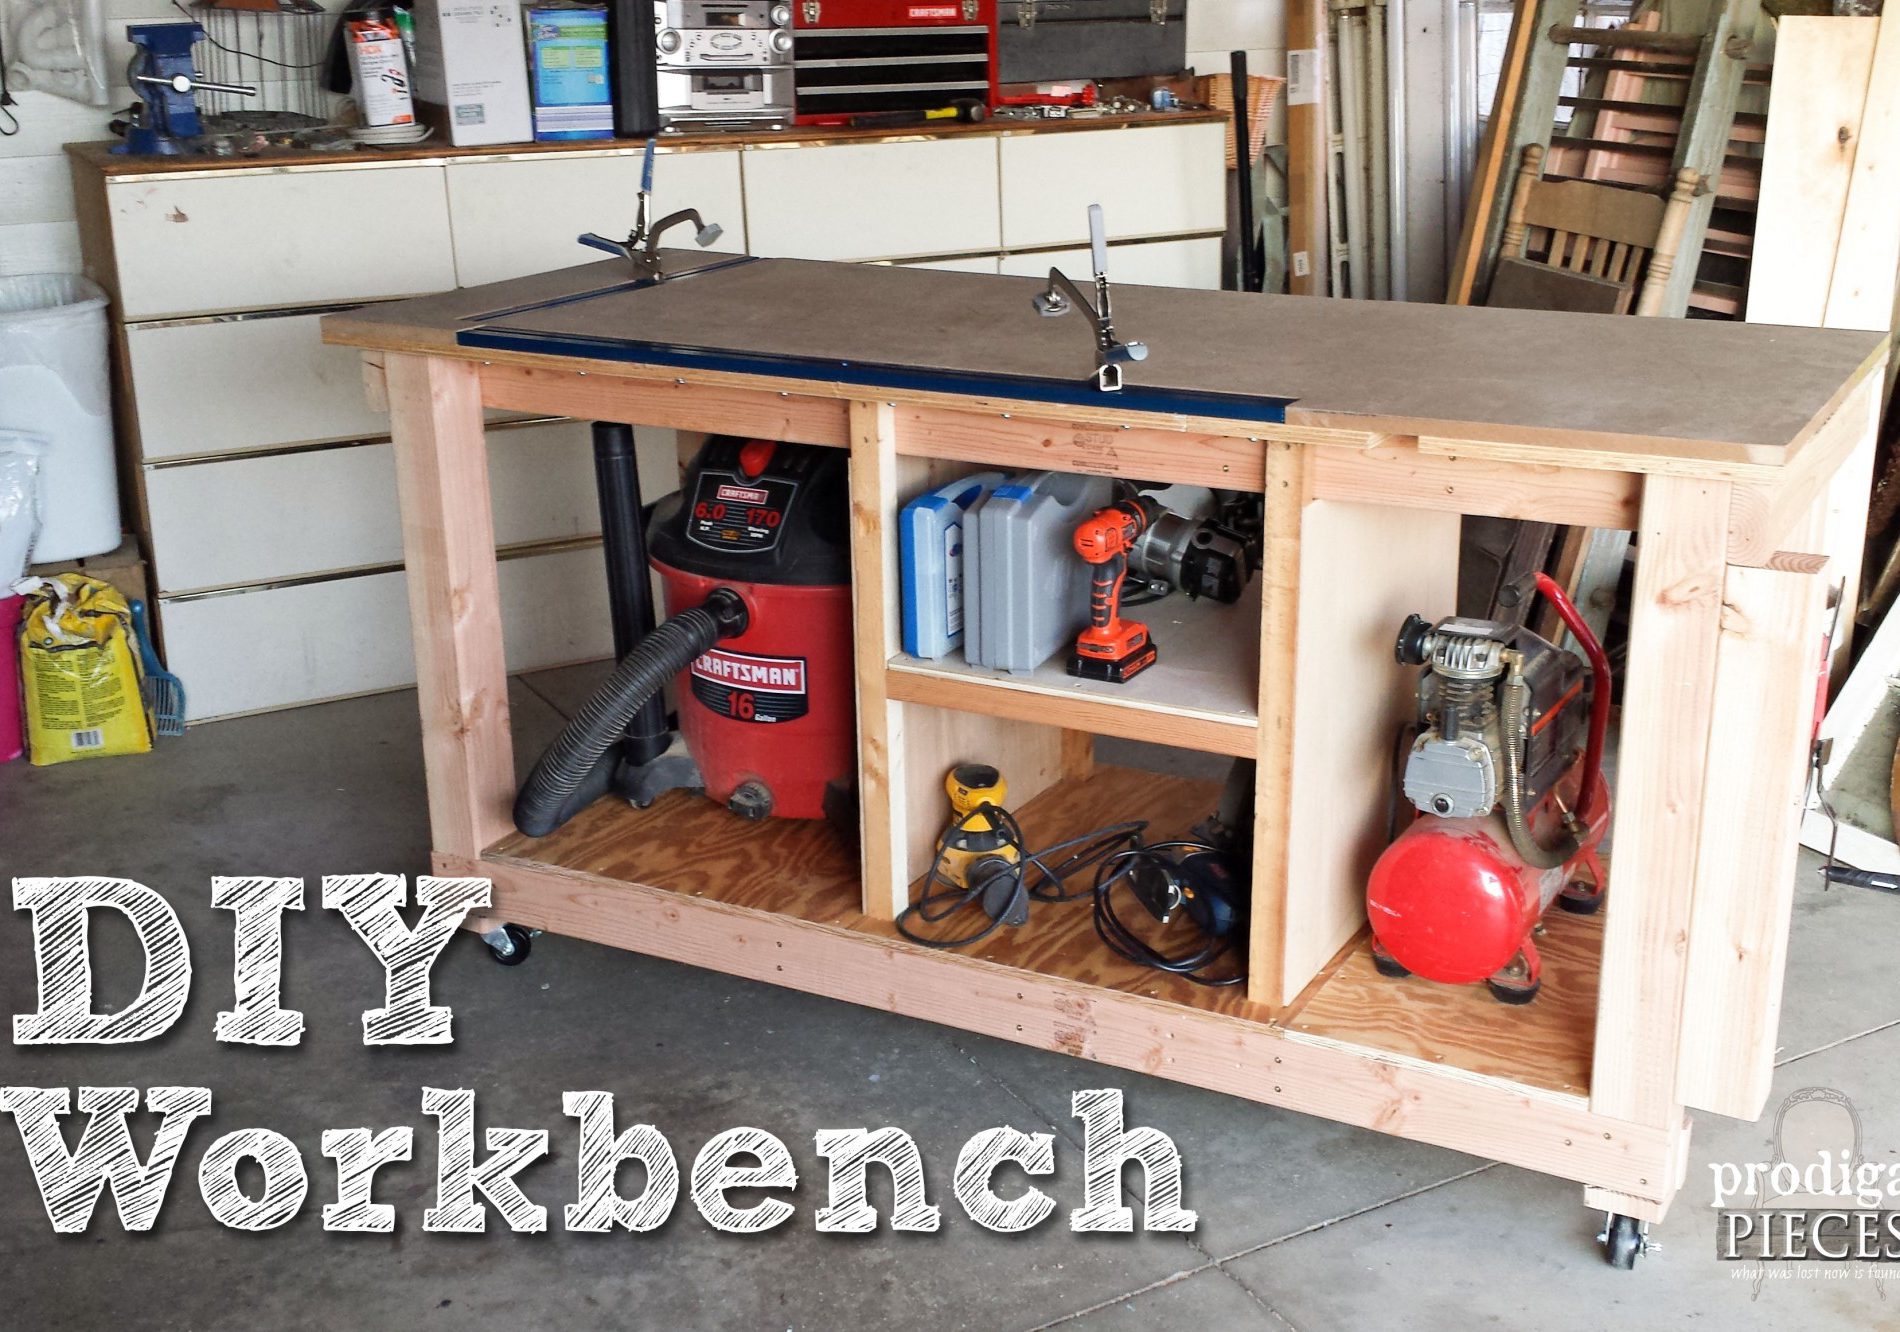 Build a DIY Workbench Assembly Table by Prodigal Pieces | www.prodigalpieces.com